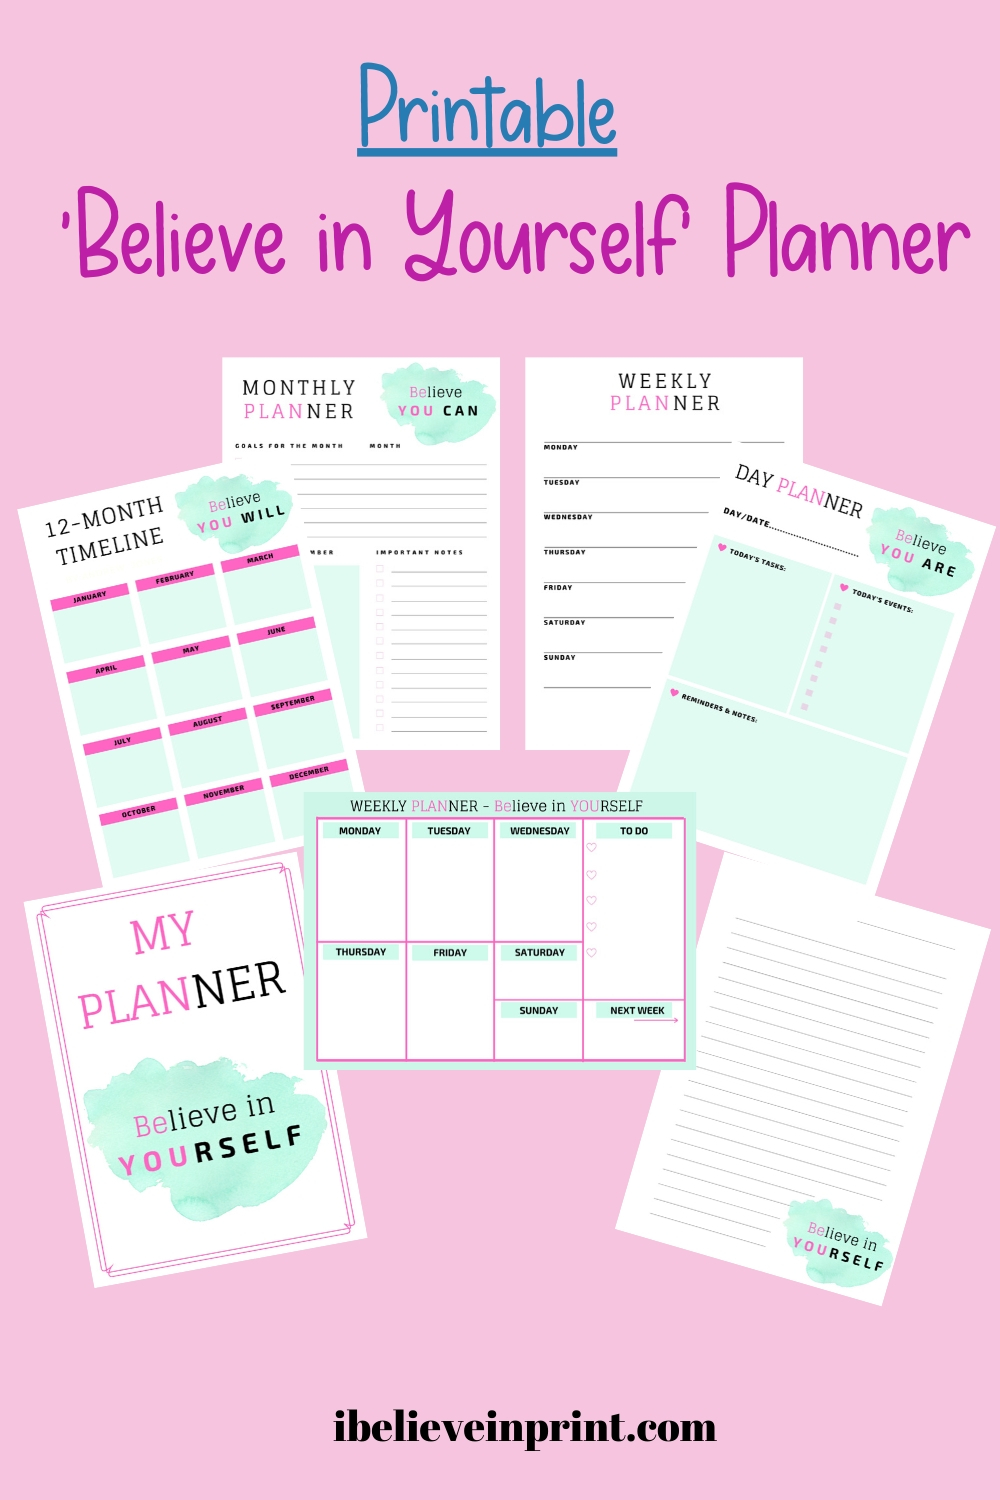 What Are Printables?